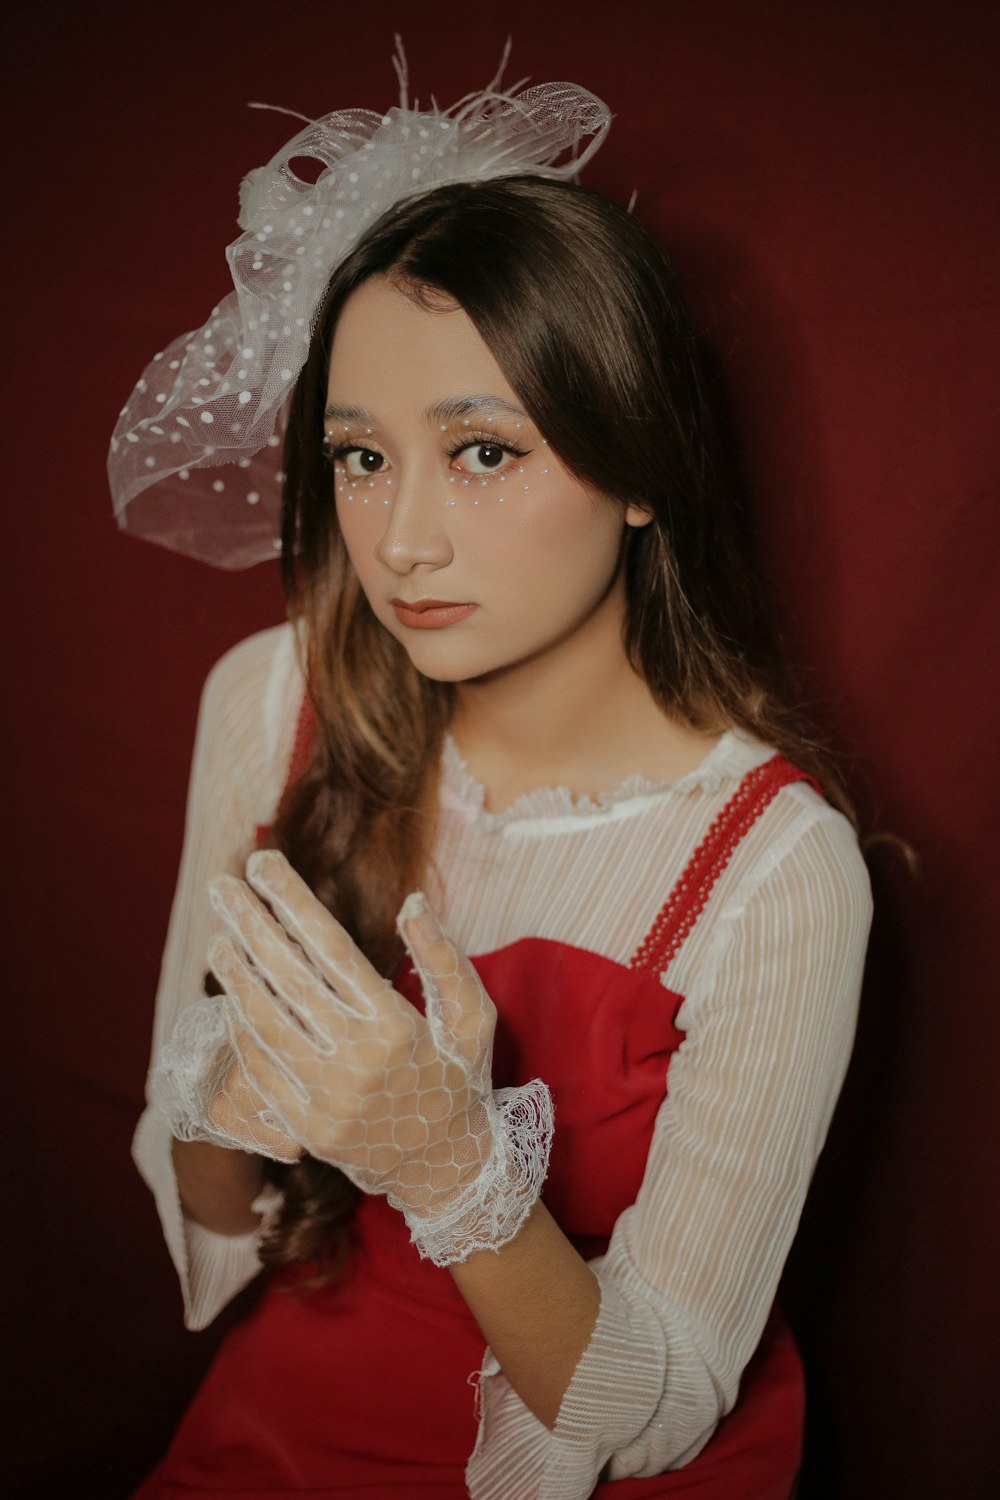 a woman wearing a red dress and white gloves